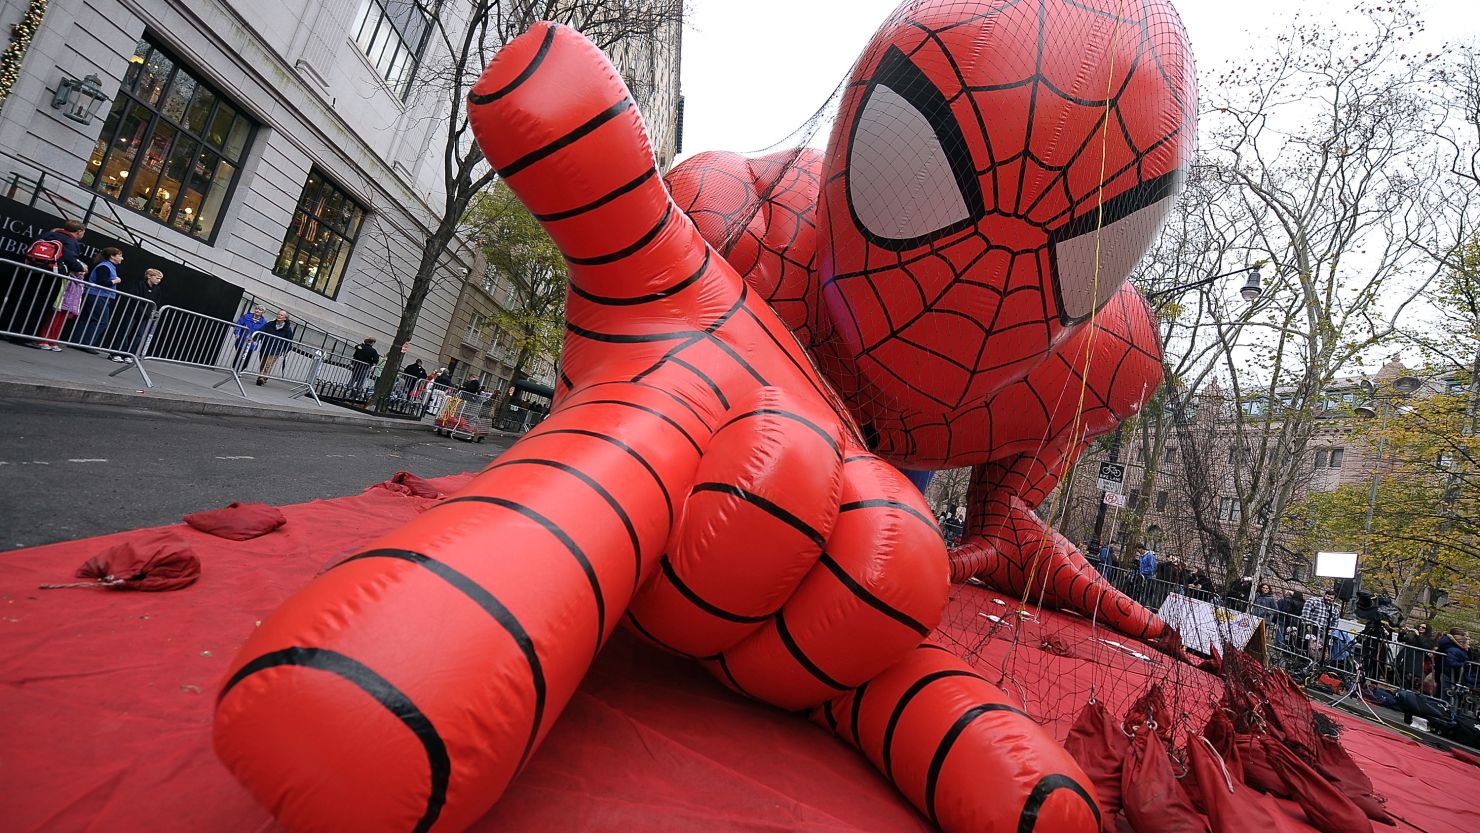 The Spider-Man balloon is getting prepared for the  Macy's Thanksgiving Day Parade in New York City. 